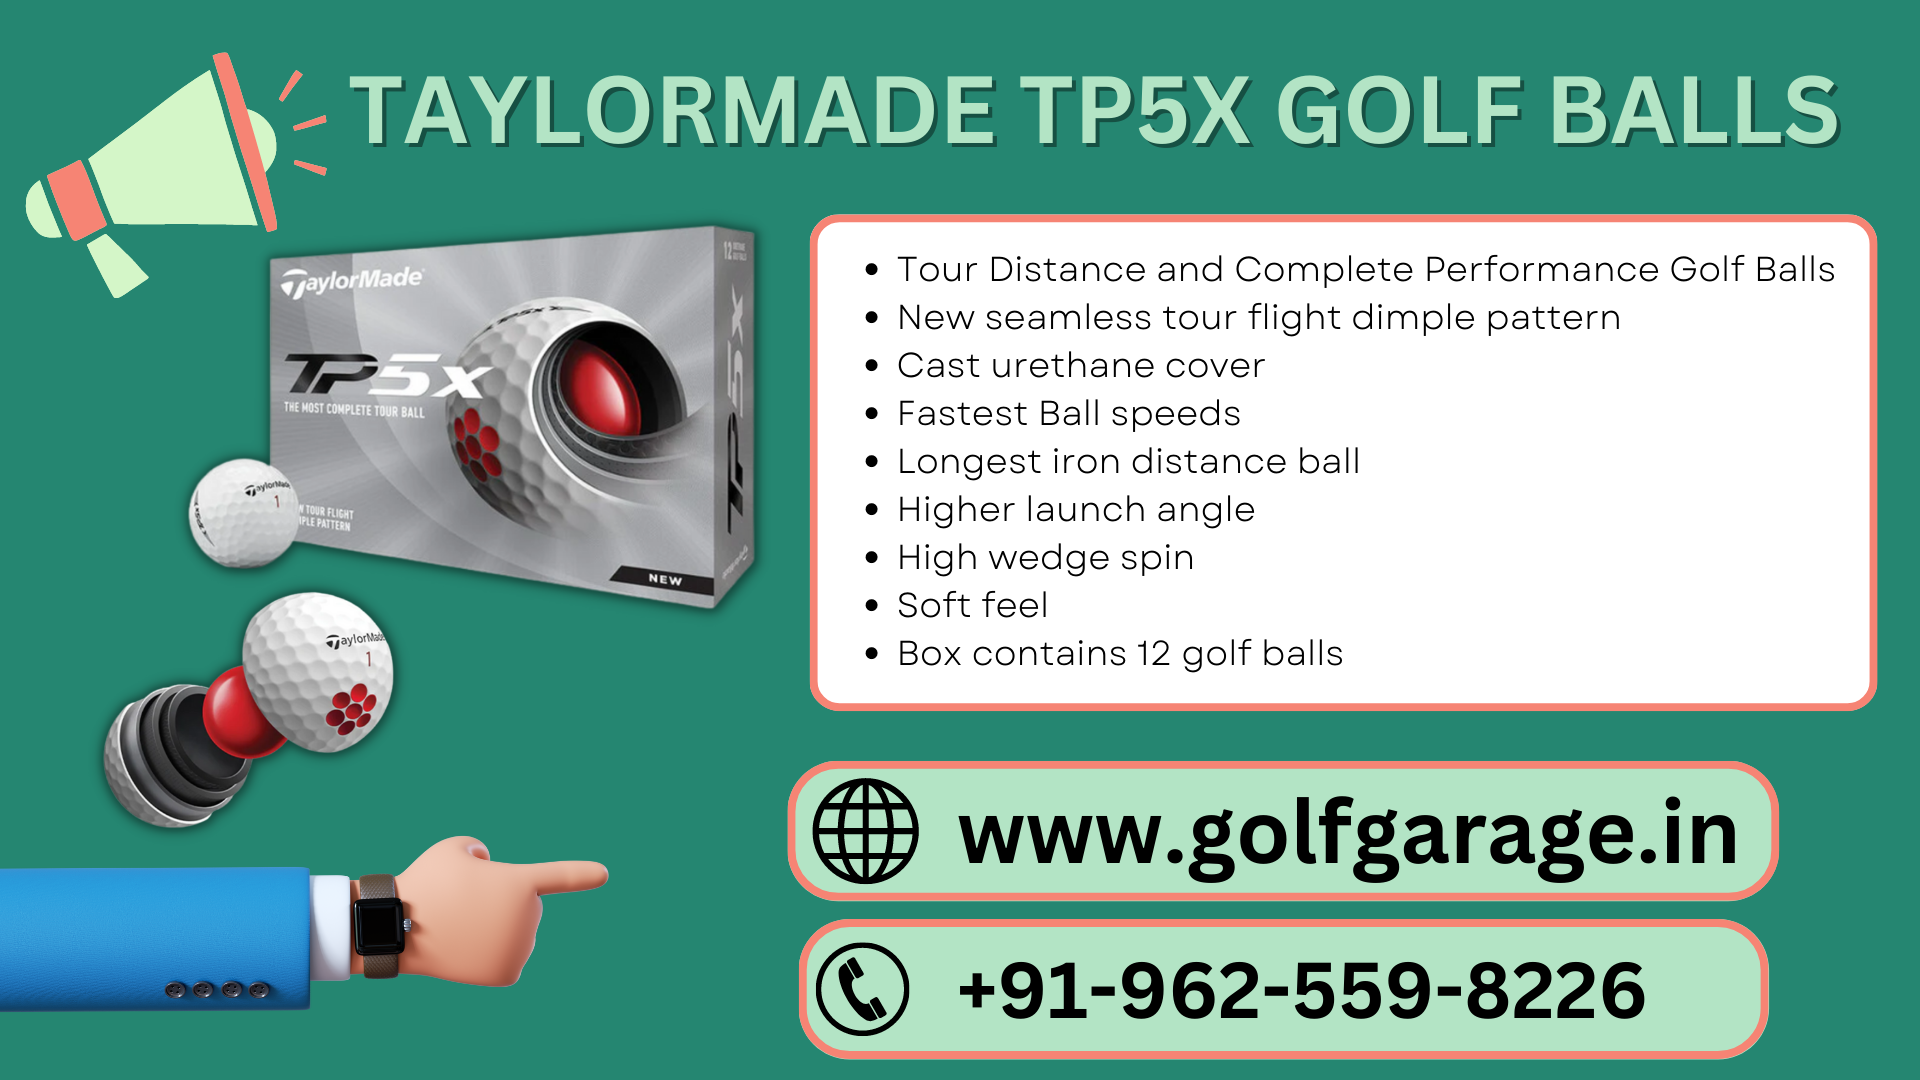 BUY TAYLORMADE TP5X GOLF BALLS IN INDIA